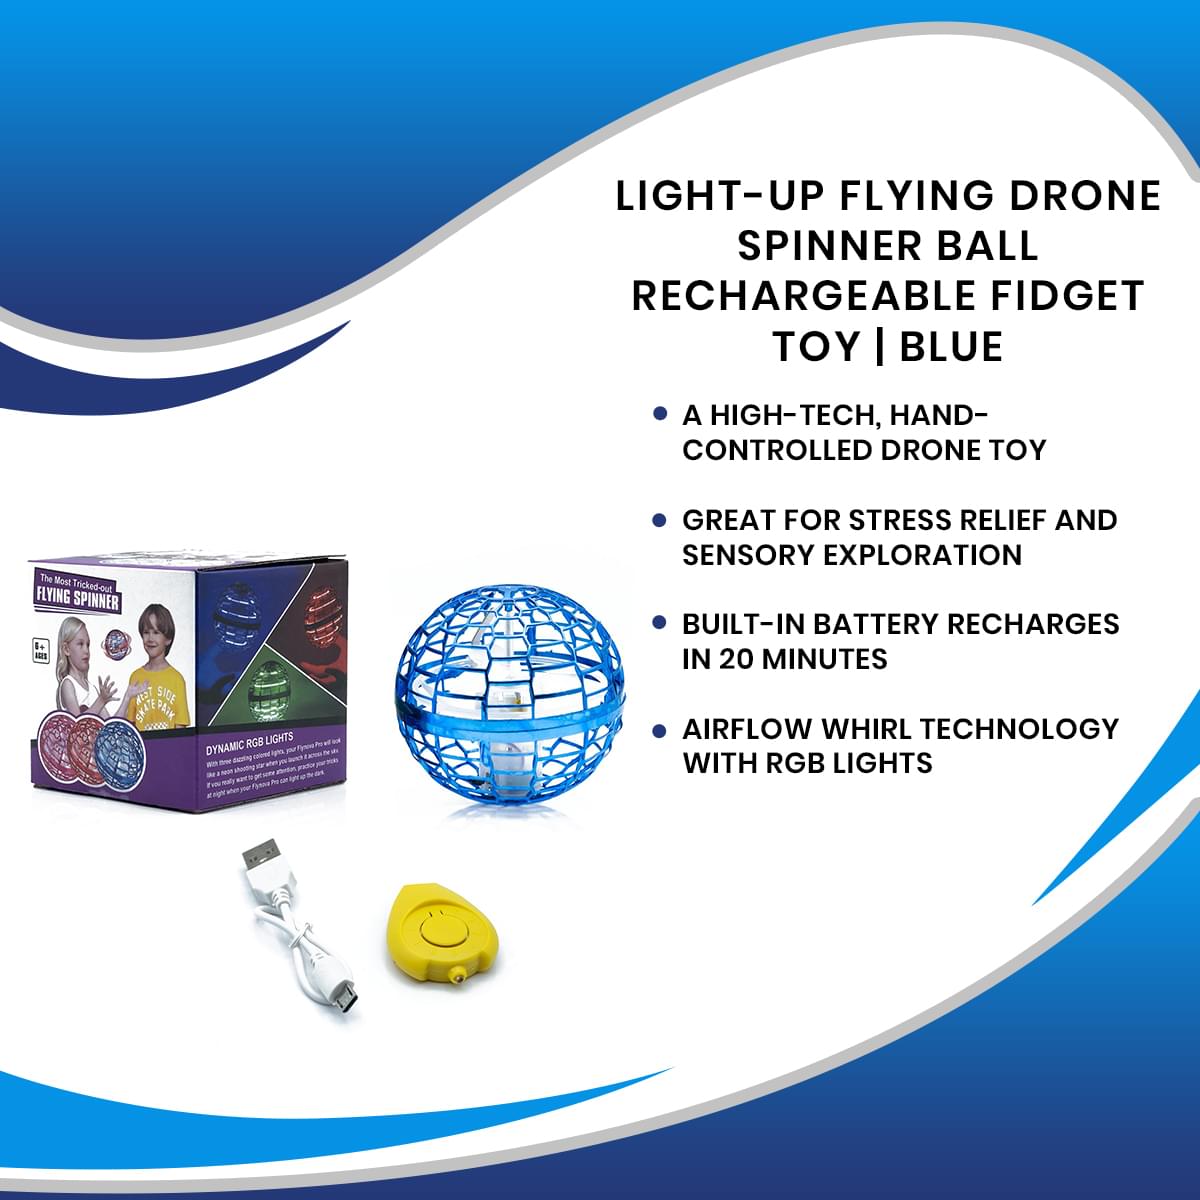 Light-Up Flying Drone Spinner Ball Rechargeable Fidget Toy | Blue